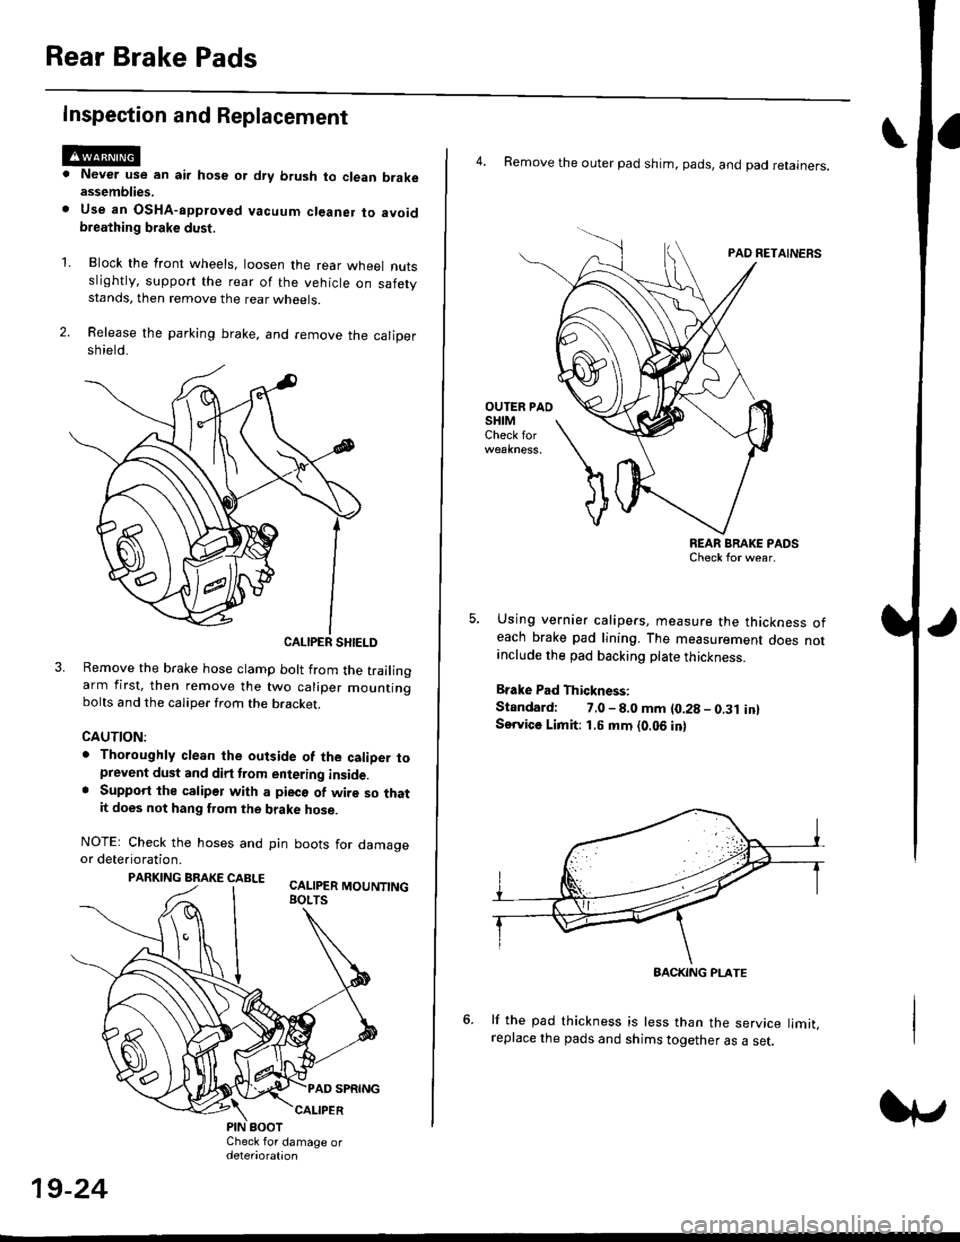 HONDA CIVIC 1999 6.G Owners Manual Rear Brake Pads
Inspection and Replacement
Never use an air hose or dry brush to clean brakeassemblies.
Use an OsHA-apptoved vacuum cl€aner to avoidbreathing brake dust,
Block the front wheels, loos